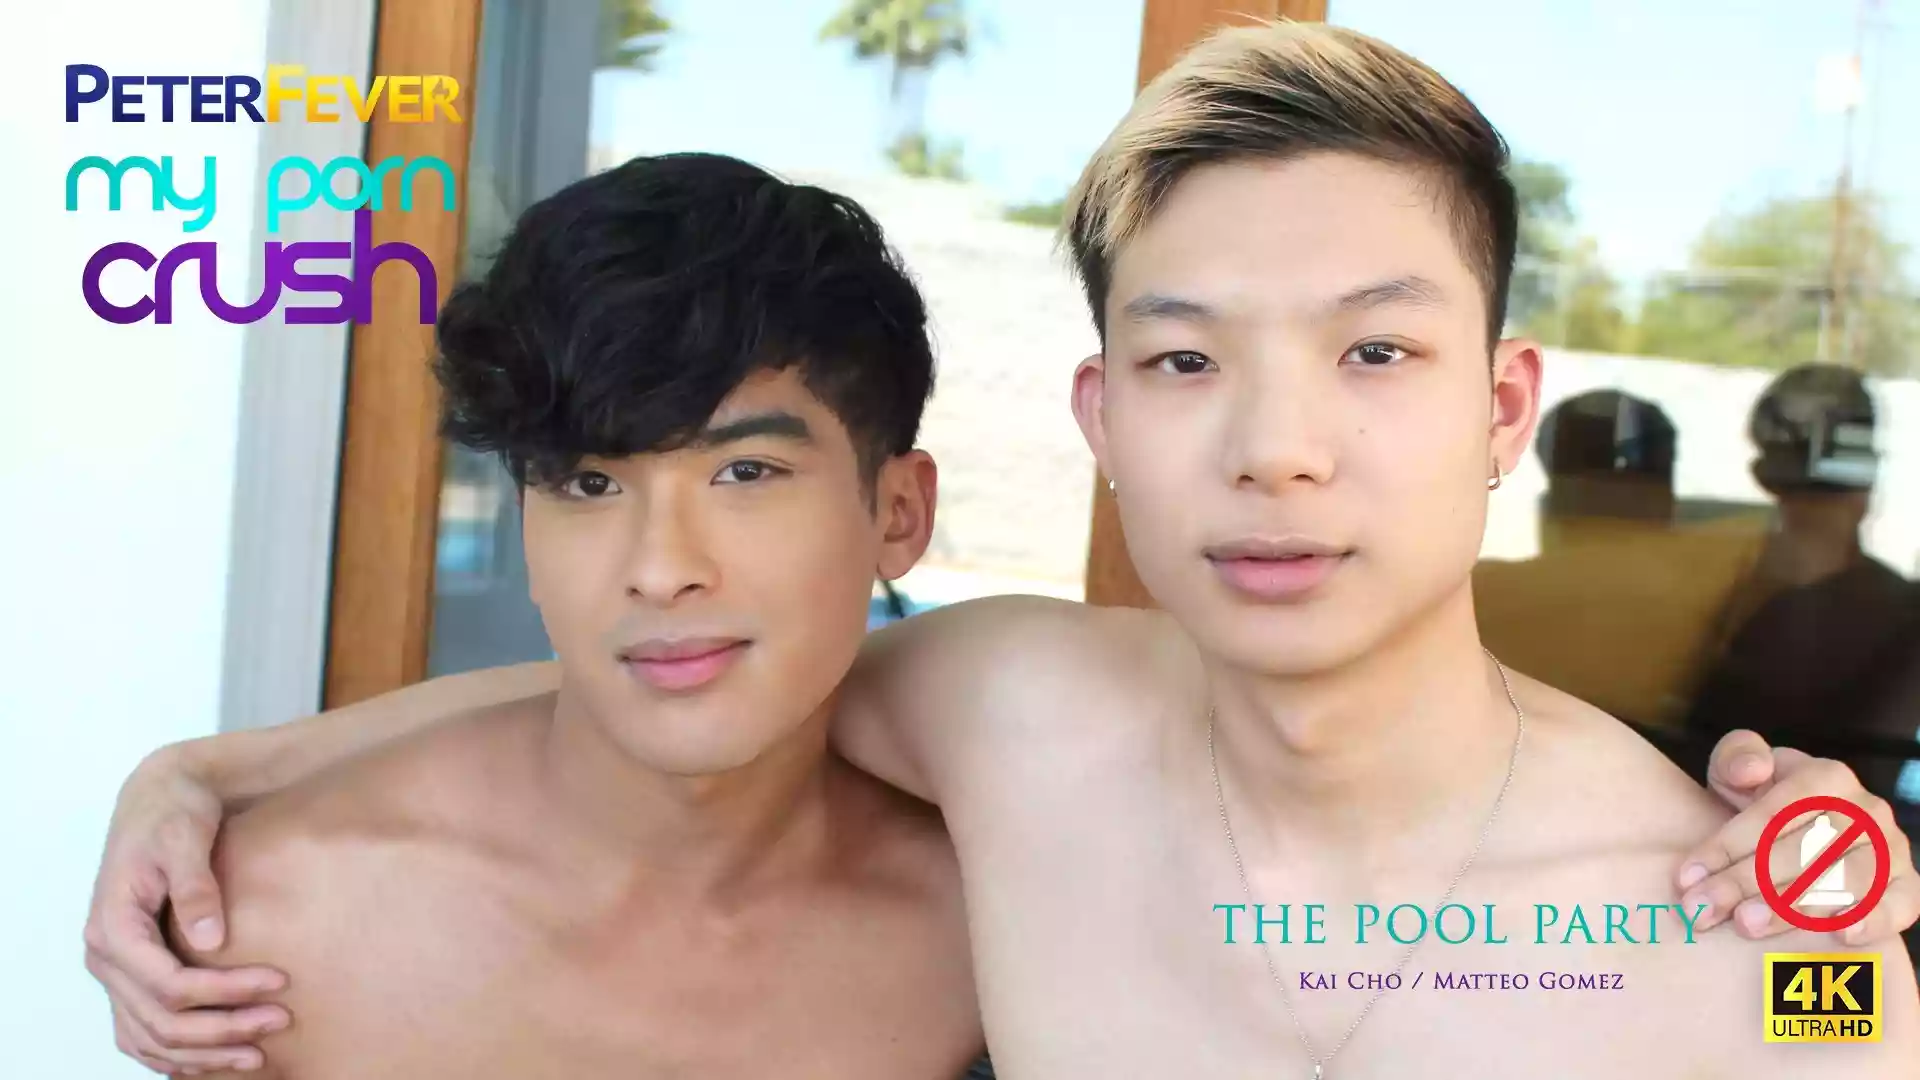 My Porn Crush 2, The Pool Party – Kai Cho and Matteo Gomez